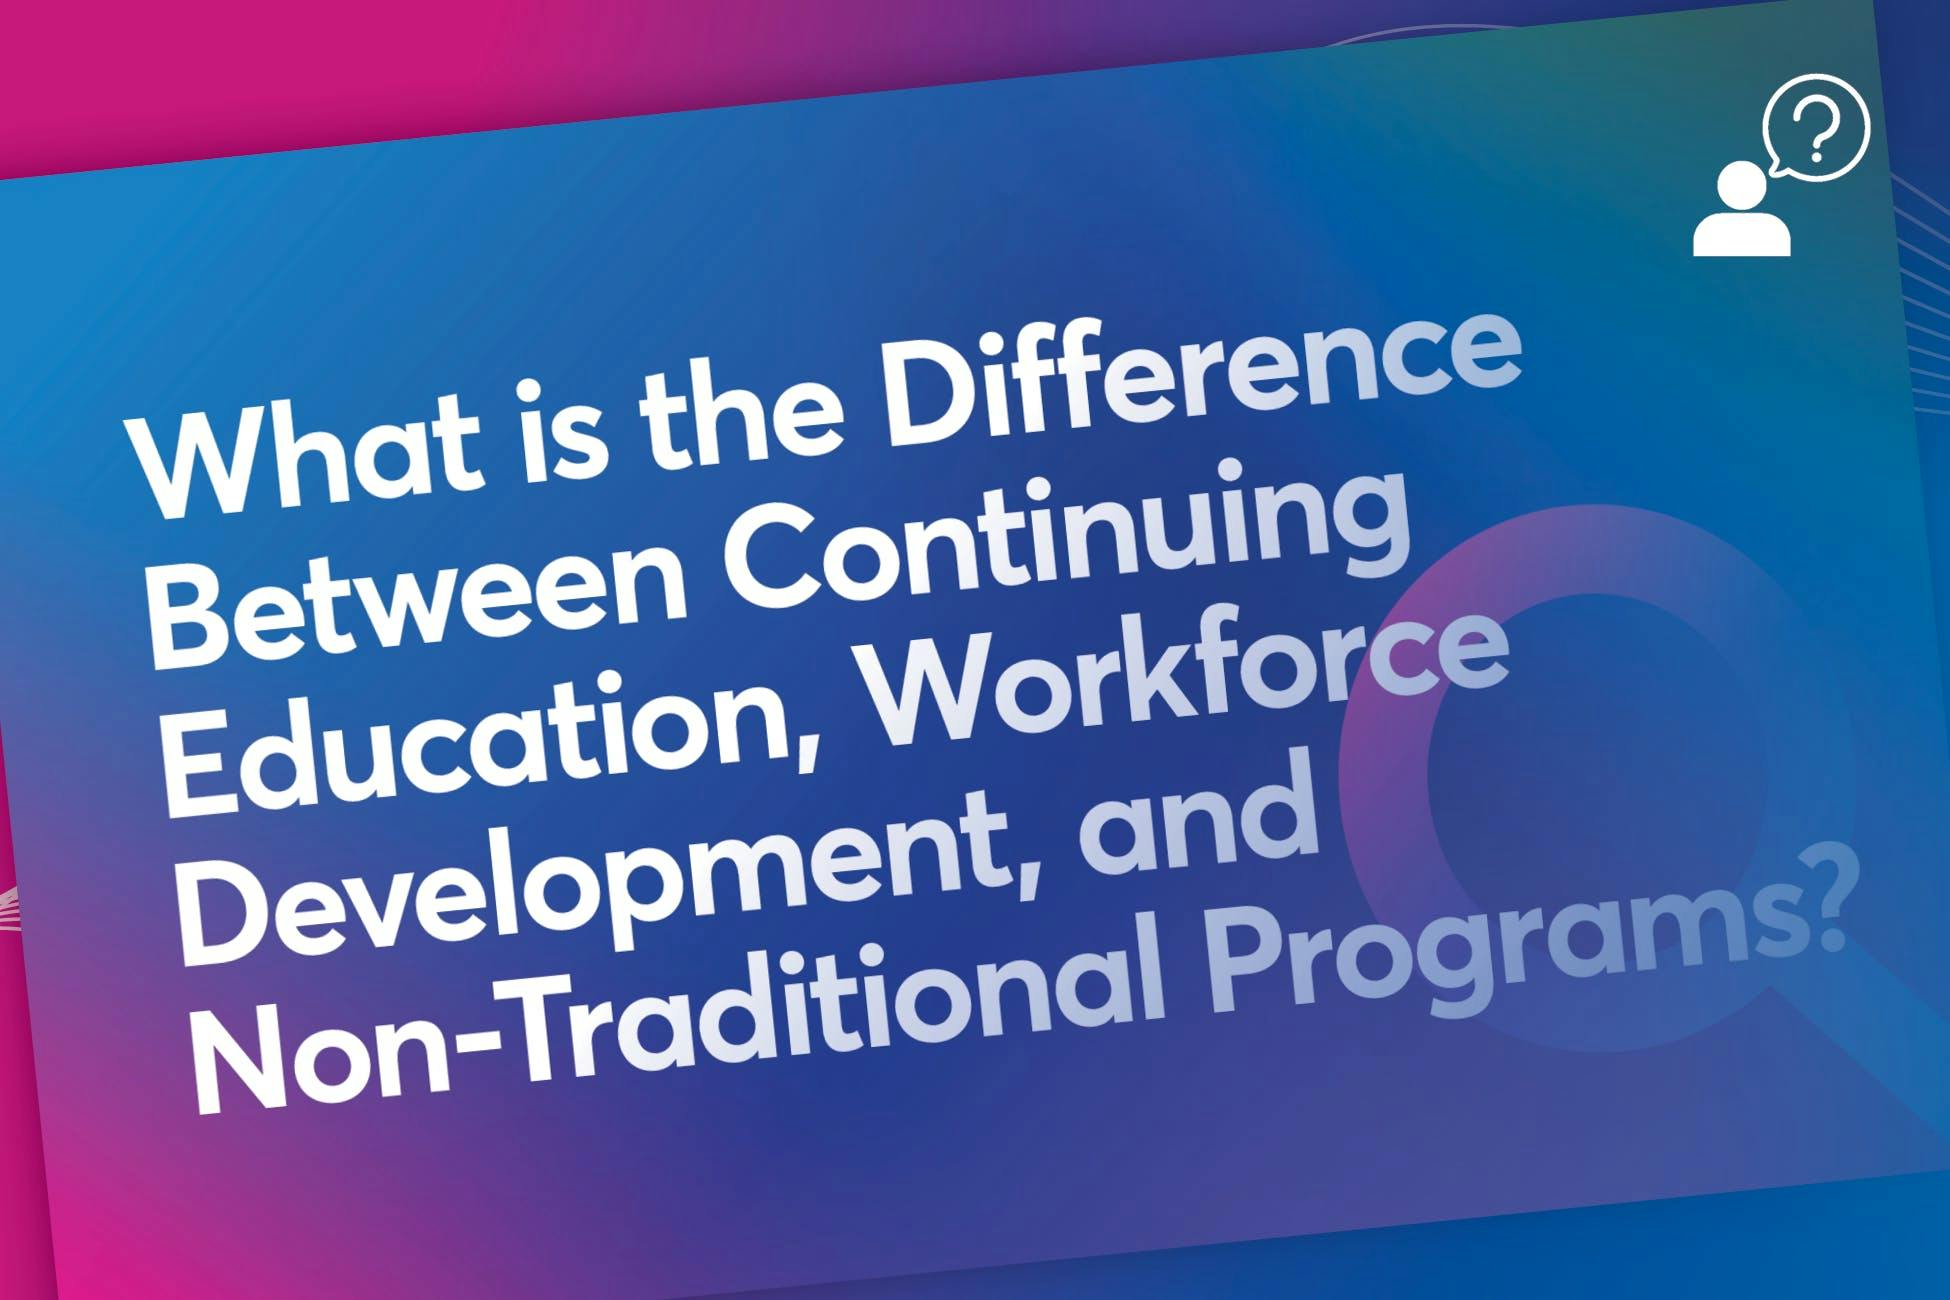 Question: What is the Difference Between Continuing Education, Workforce Development, and Non-Traditional Programs?